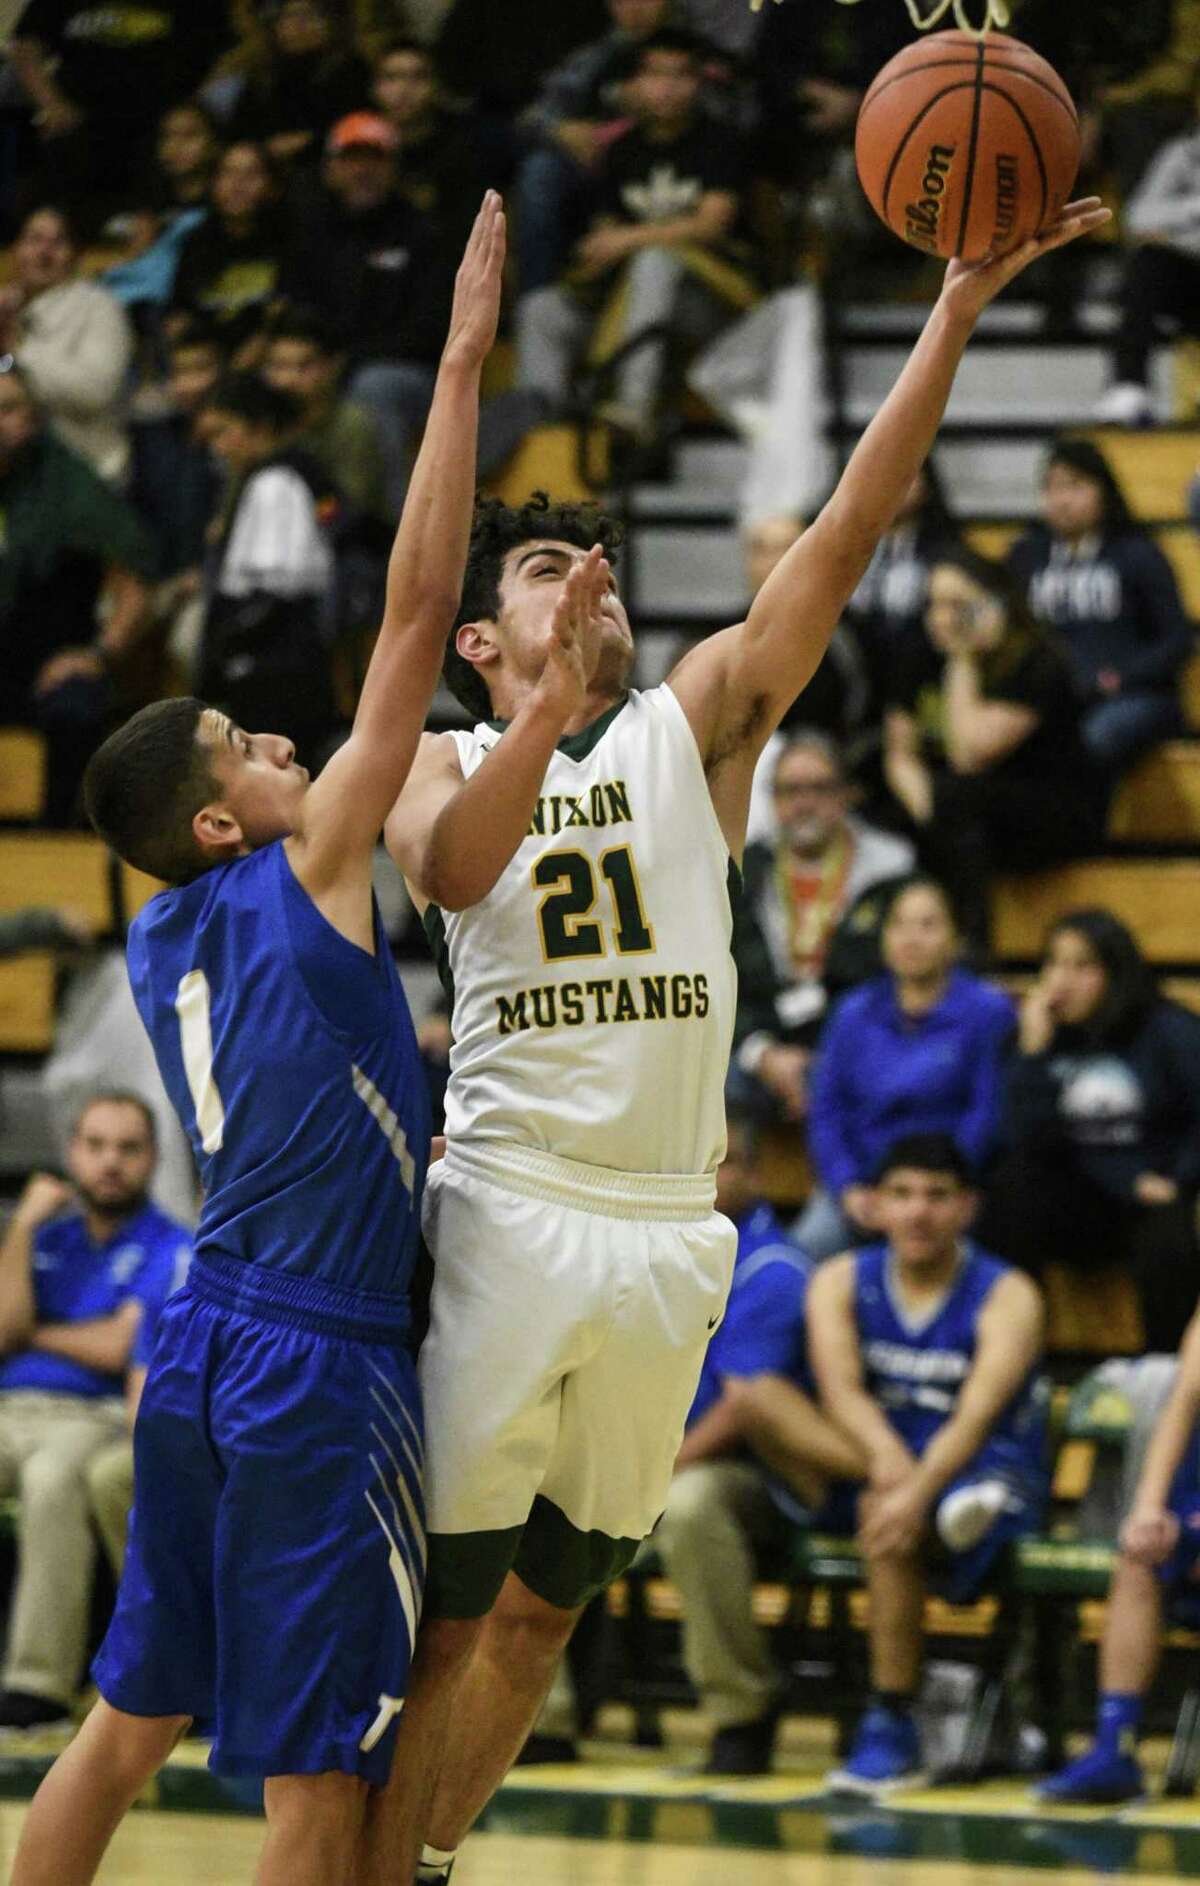 JC Ayala and Nixon defeated Cigarroa 94-44 Tuesday night. Ayala led the Mustangs with 19 points.